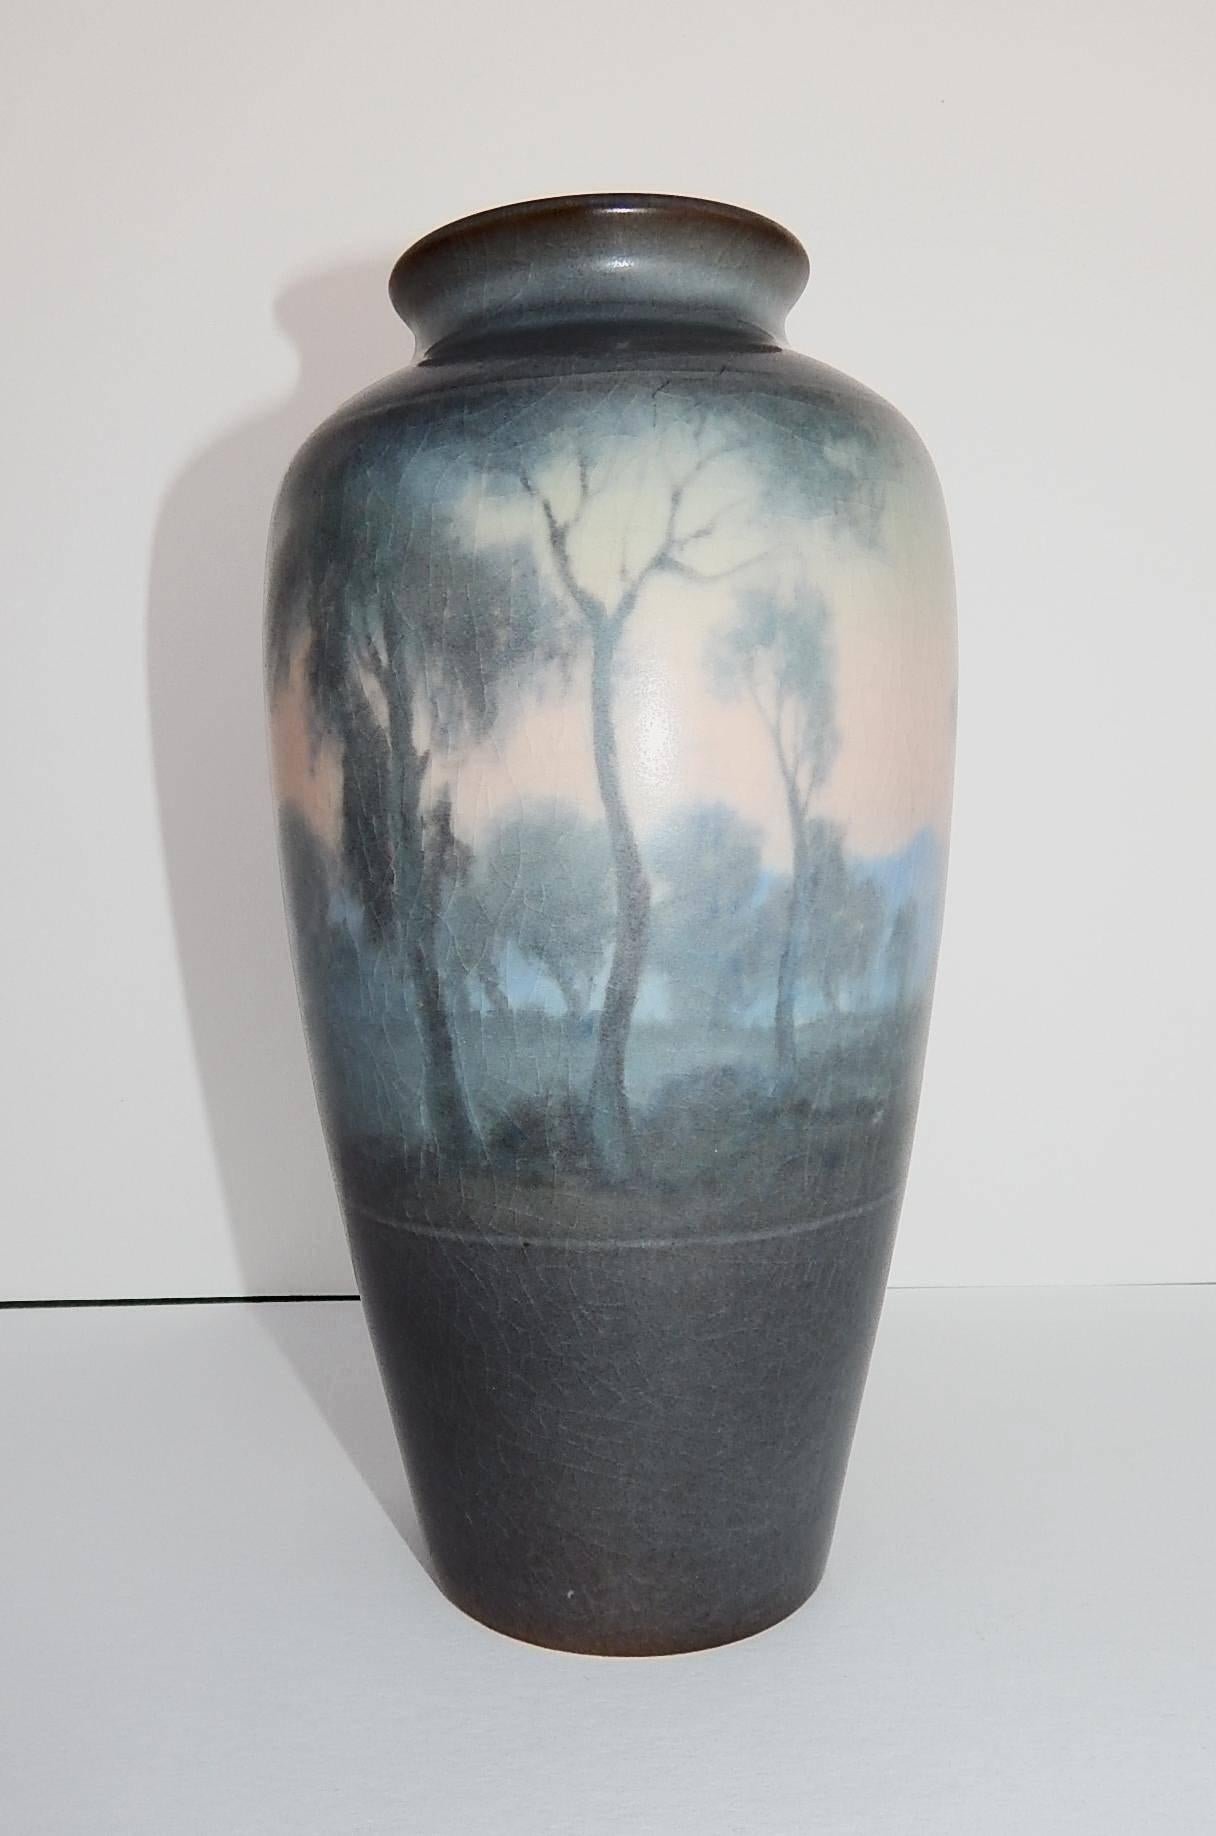 Beautiful scenic rookwood Vellum ceramic vase.
Rookwood mark, dated 1919, incised artist monogram and V for Vellum.
Artist: Fred Rothenbusch for Rookwood Pottery Company - Cincinnati, Ohio.
Mint condition; no chips, cracks or repairs. Has